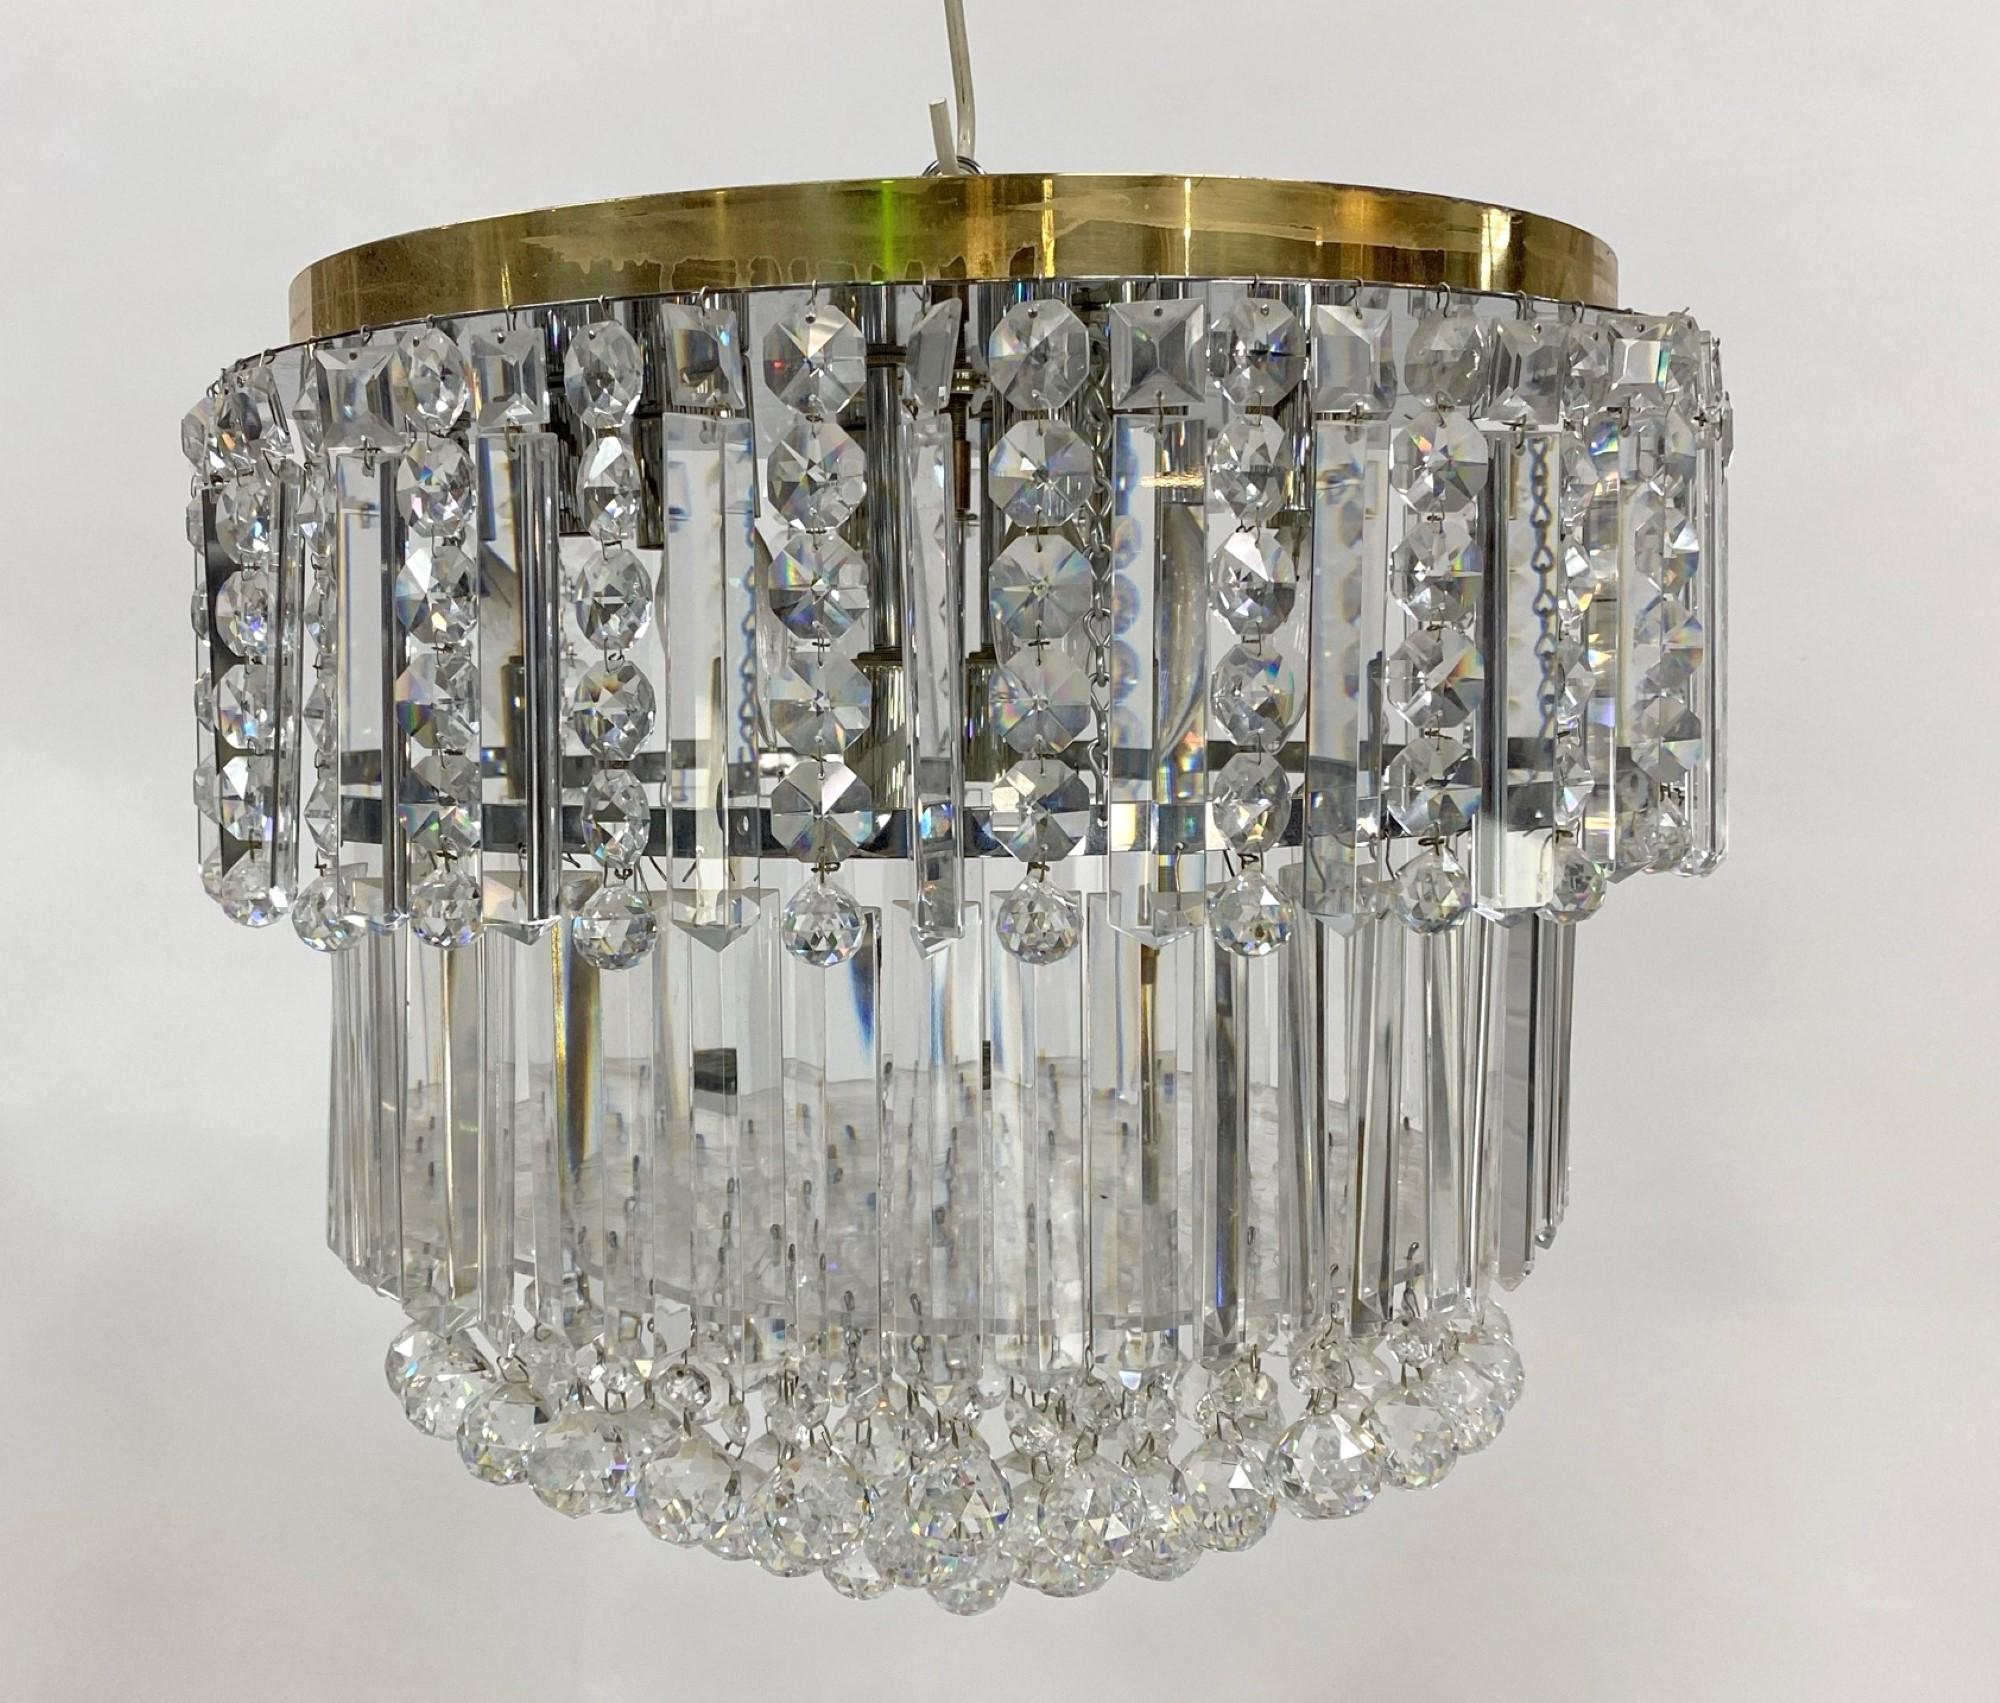 Mid-Century Modern flush mount chandelier dripping with crystals. Features a polished brass mounting base. Originaly installed as part of the decor of a Beverly Hills mansion. This can be seen at our 400 Gilligan St location in Scranton, PA.